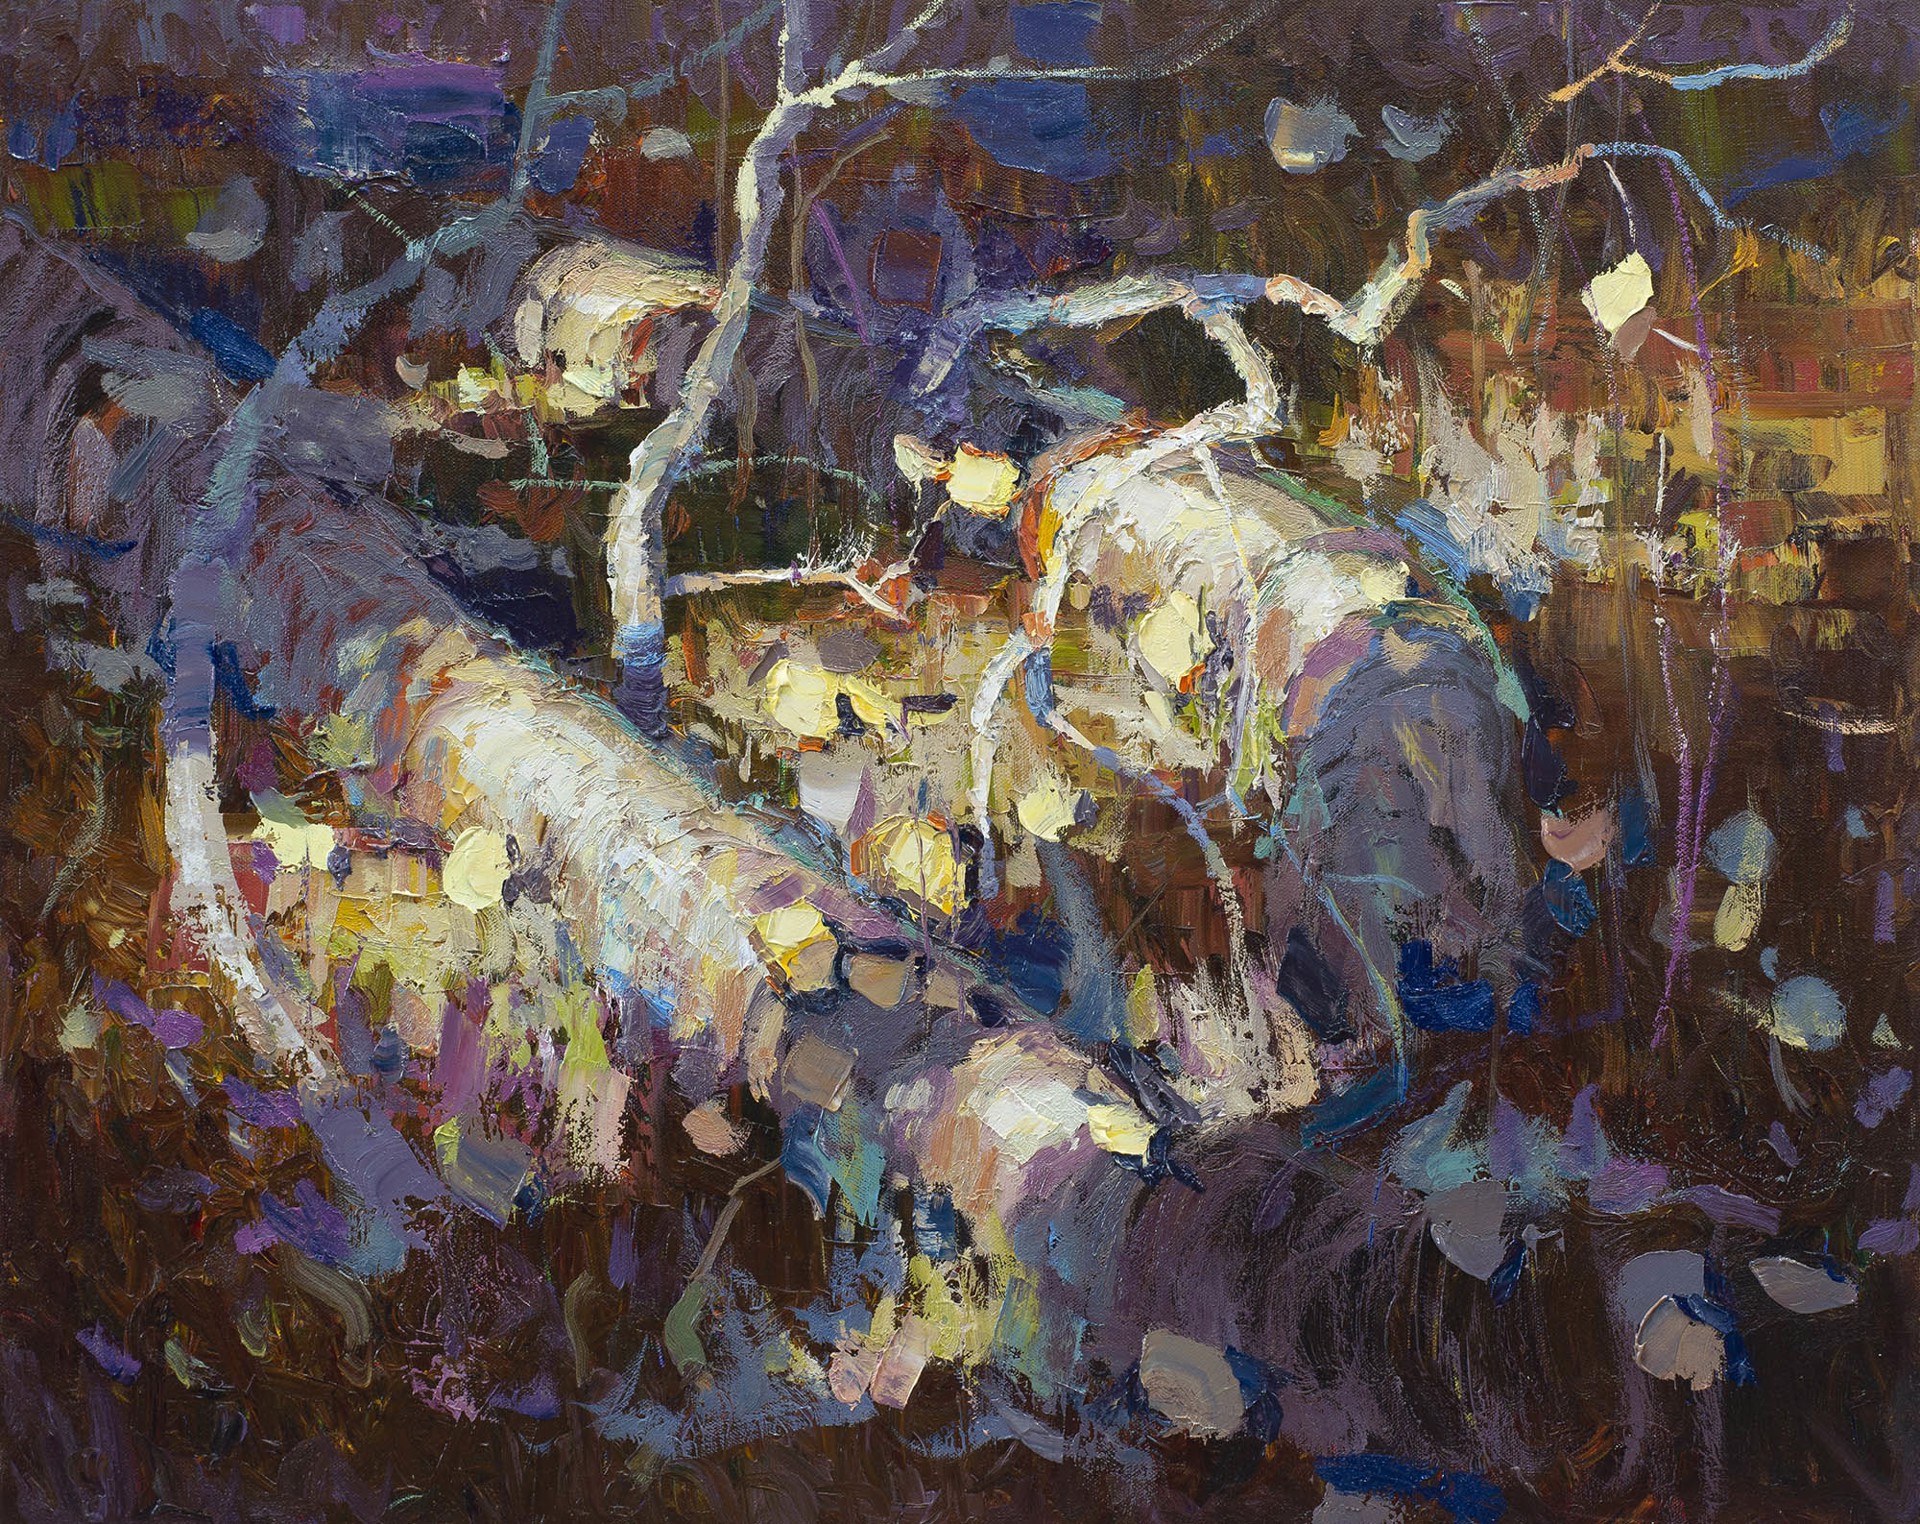 Original Oil Painting Featuring a Forest Floor With Fallen Aspen Trees